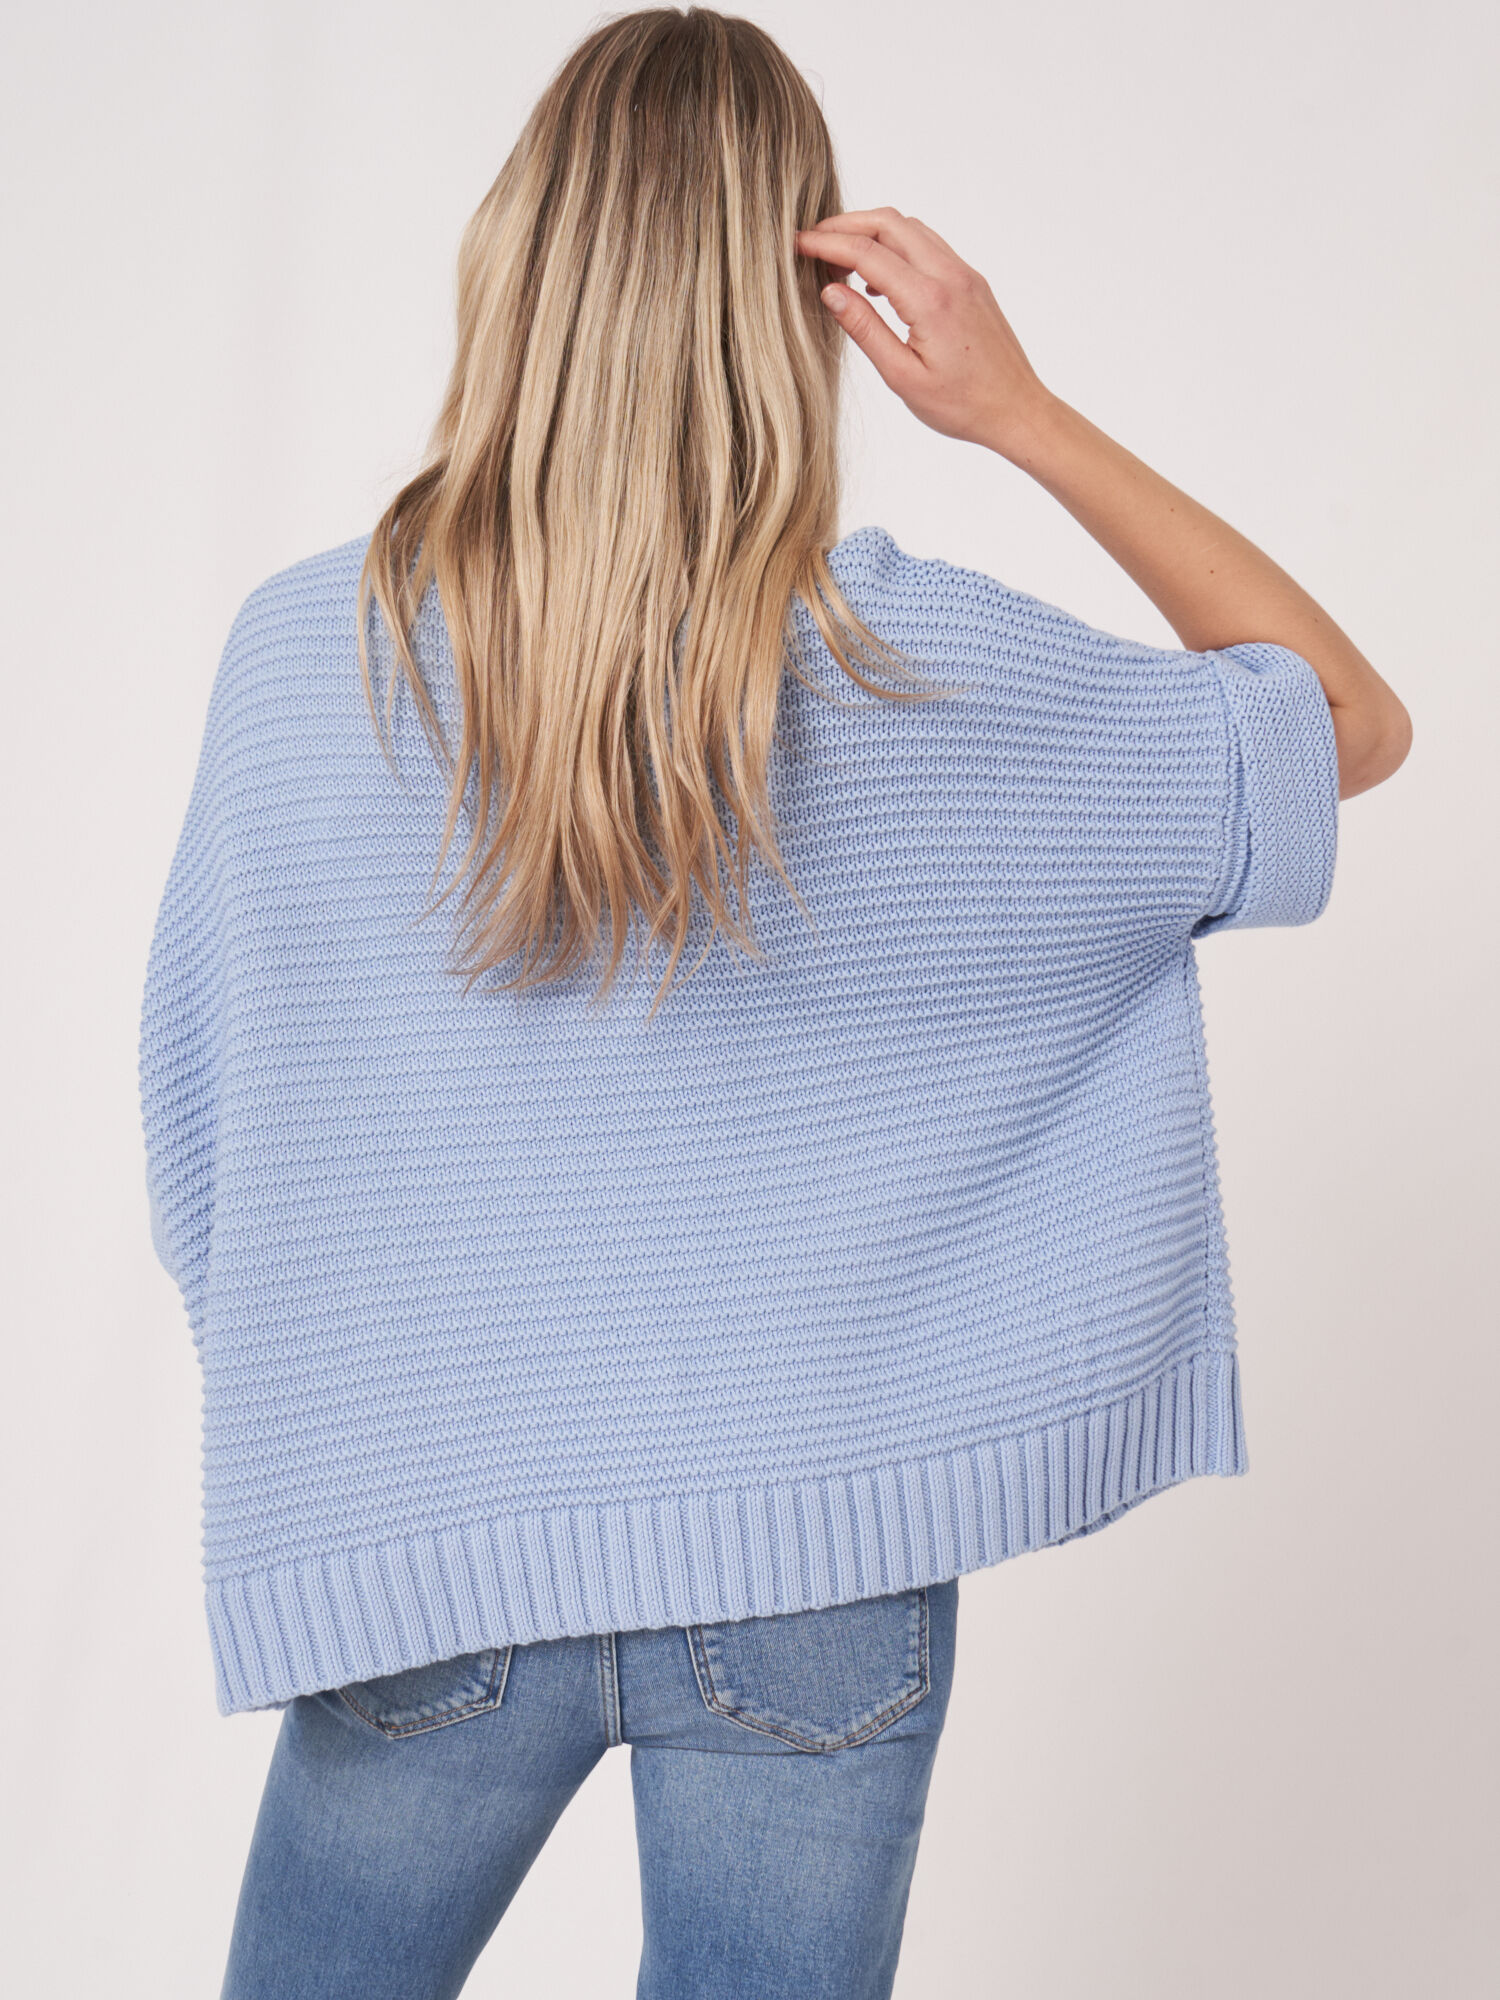 Knitted cotton poncho with zip and chunky rib texture